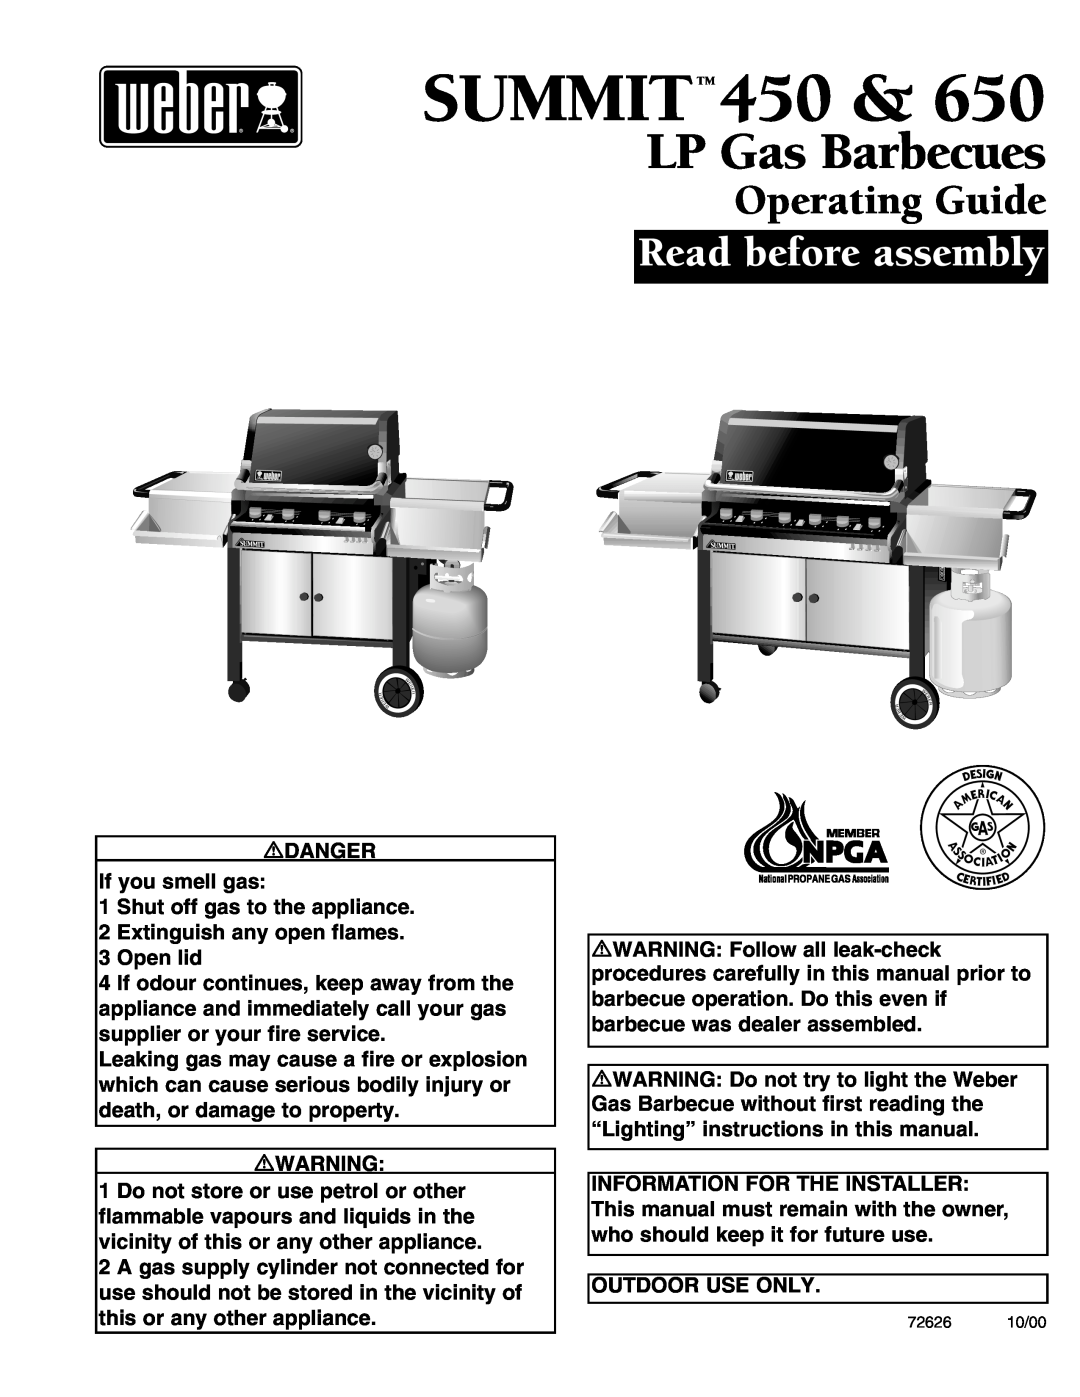 Weber 650 manual SUMMITTM 450, LP Gas Barbecues, Operating Guide, Read before assembly 